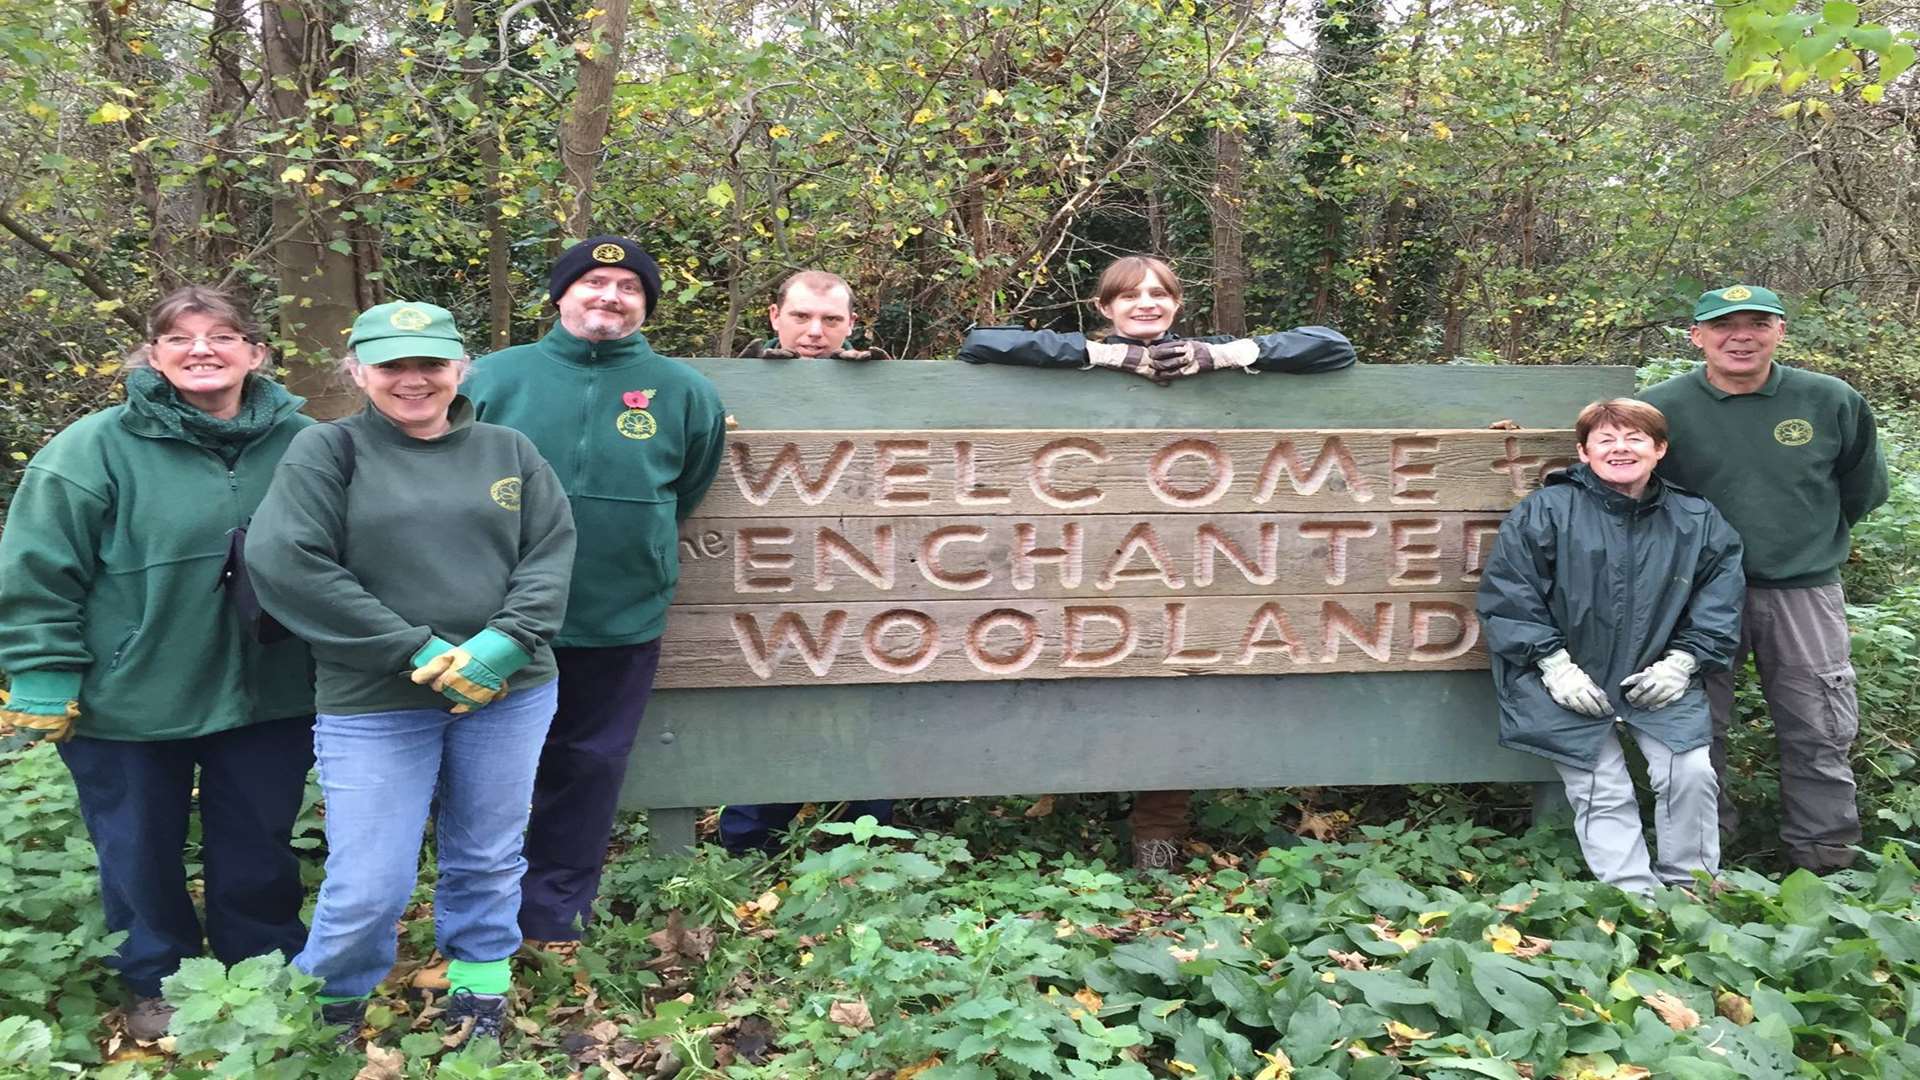 Debbie Fryer (left) with the volunteer park rangers who keep the woodland safe and clean